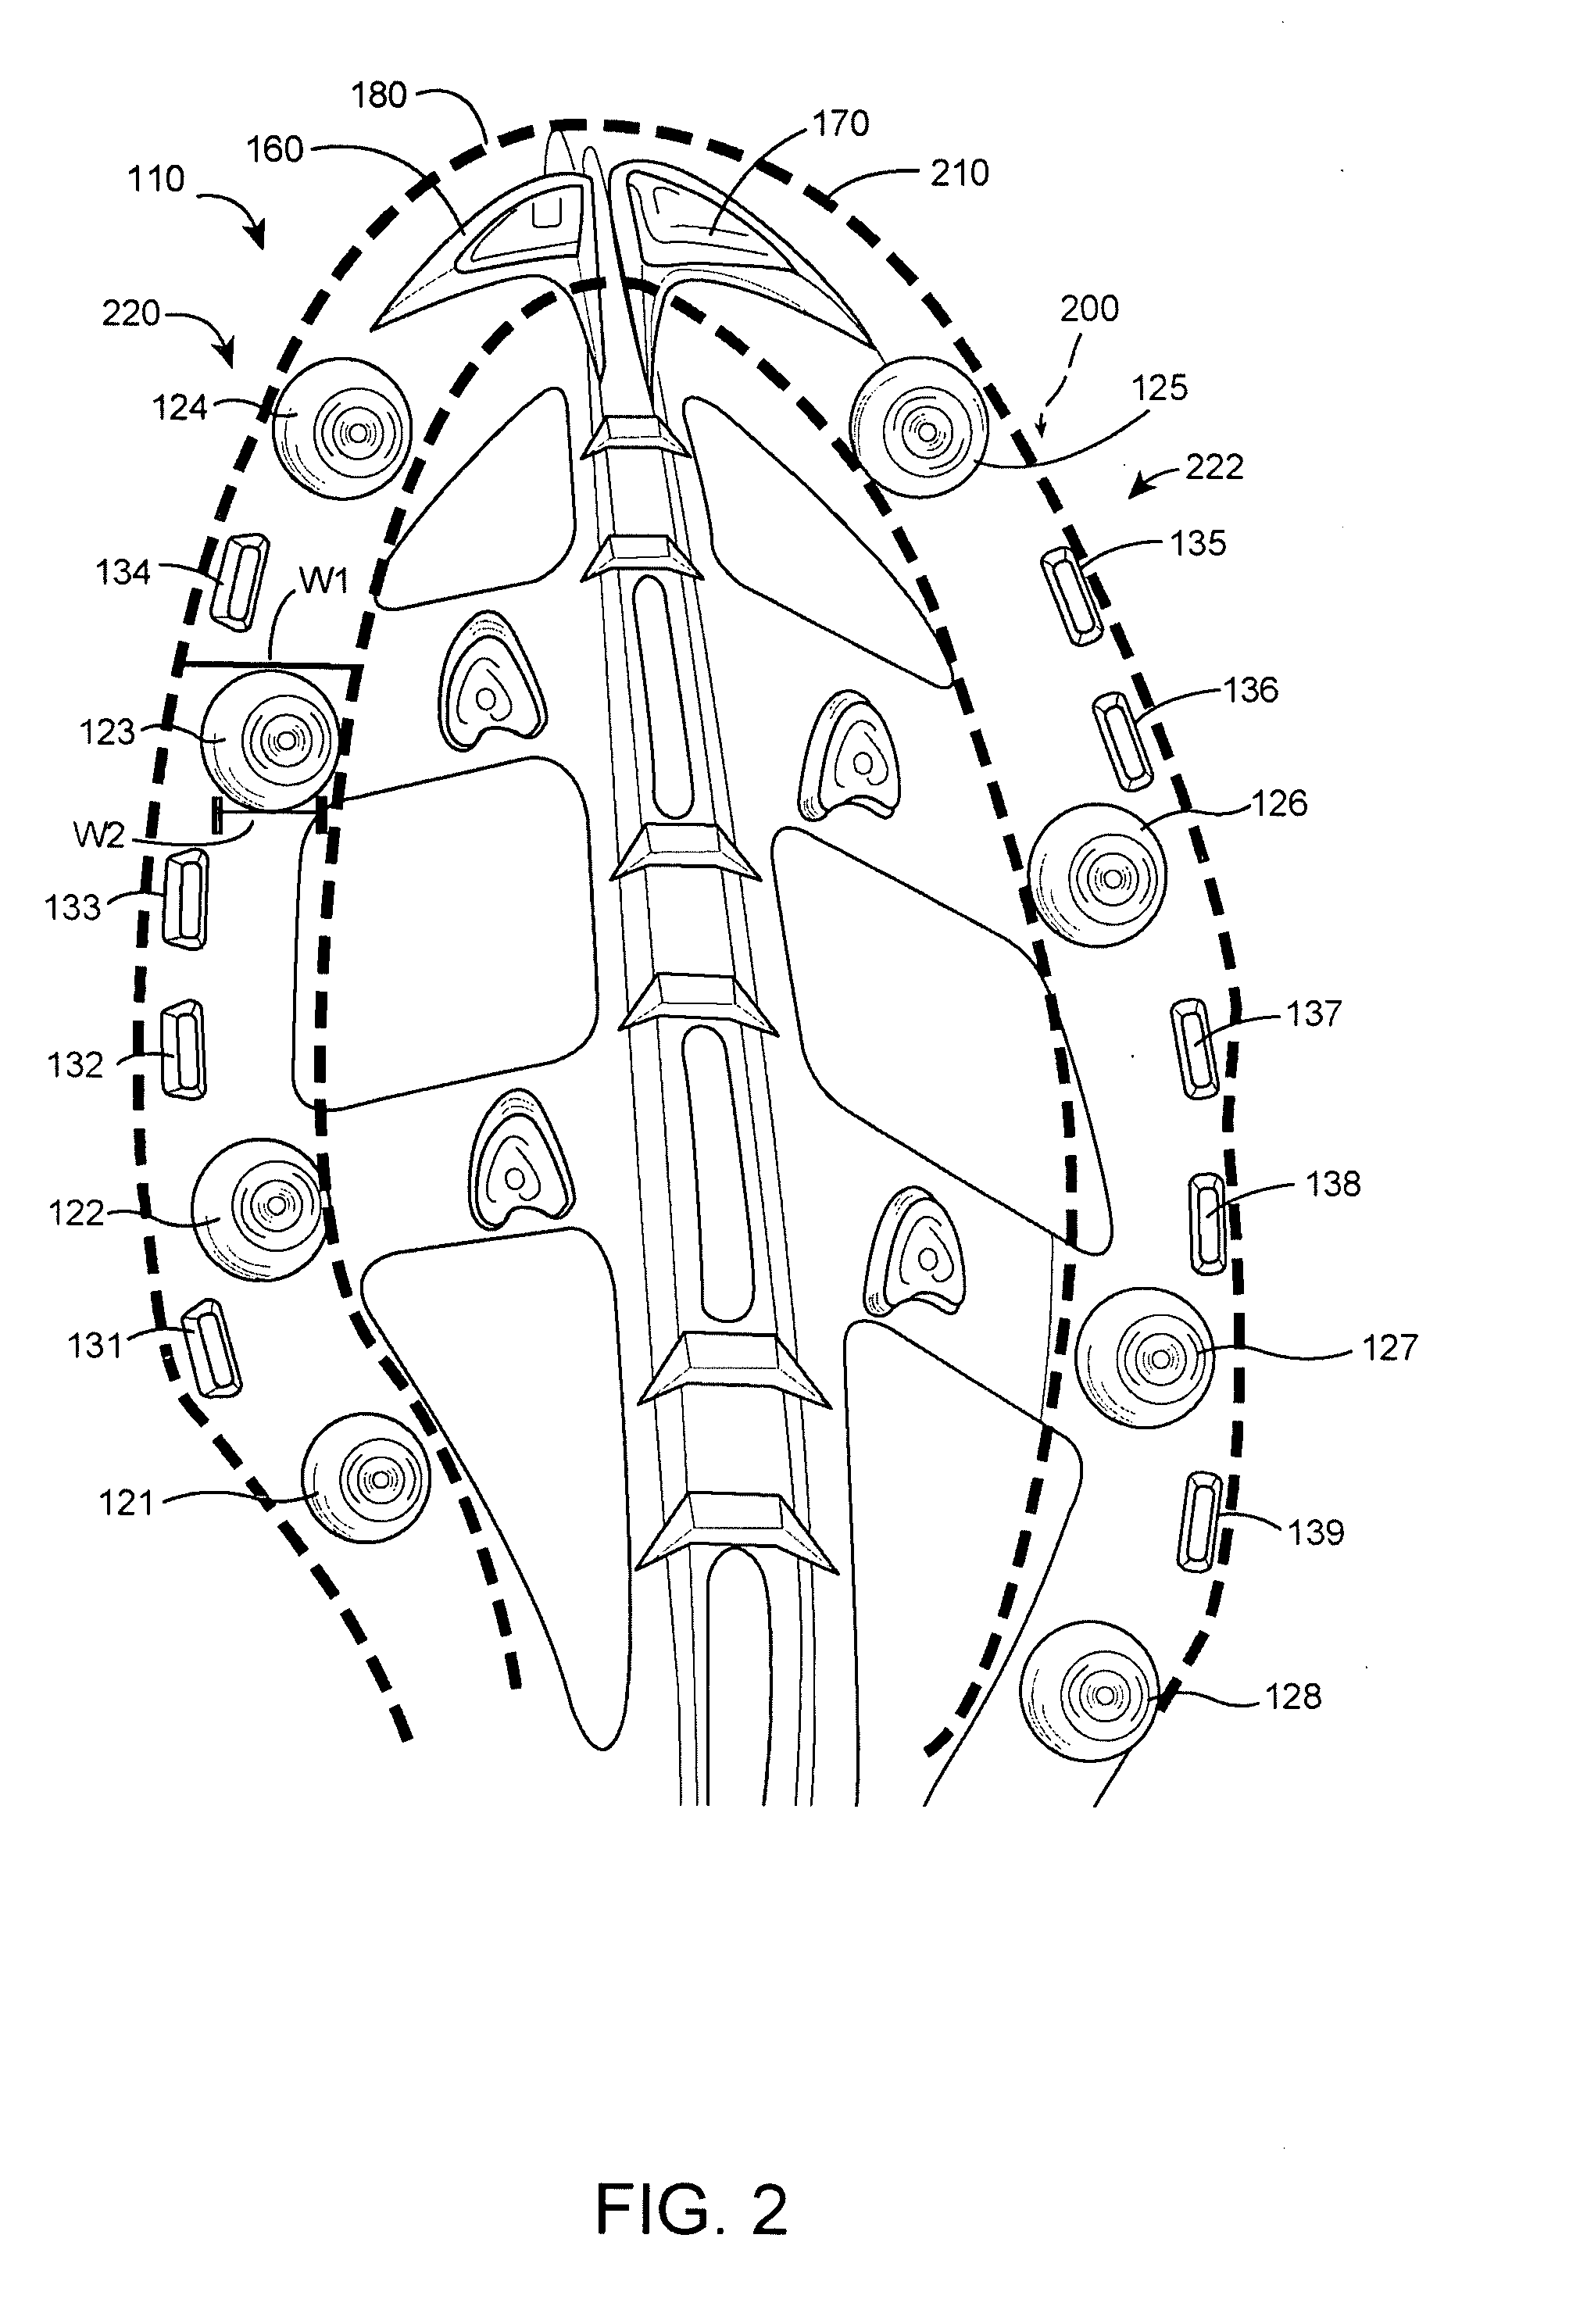 Article of Footwear with Walled Cleat System